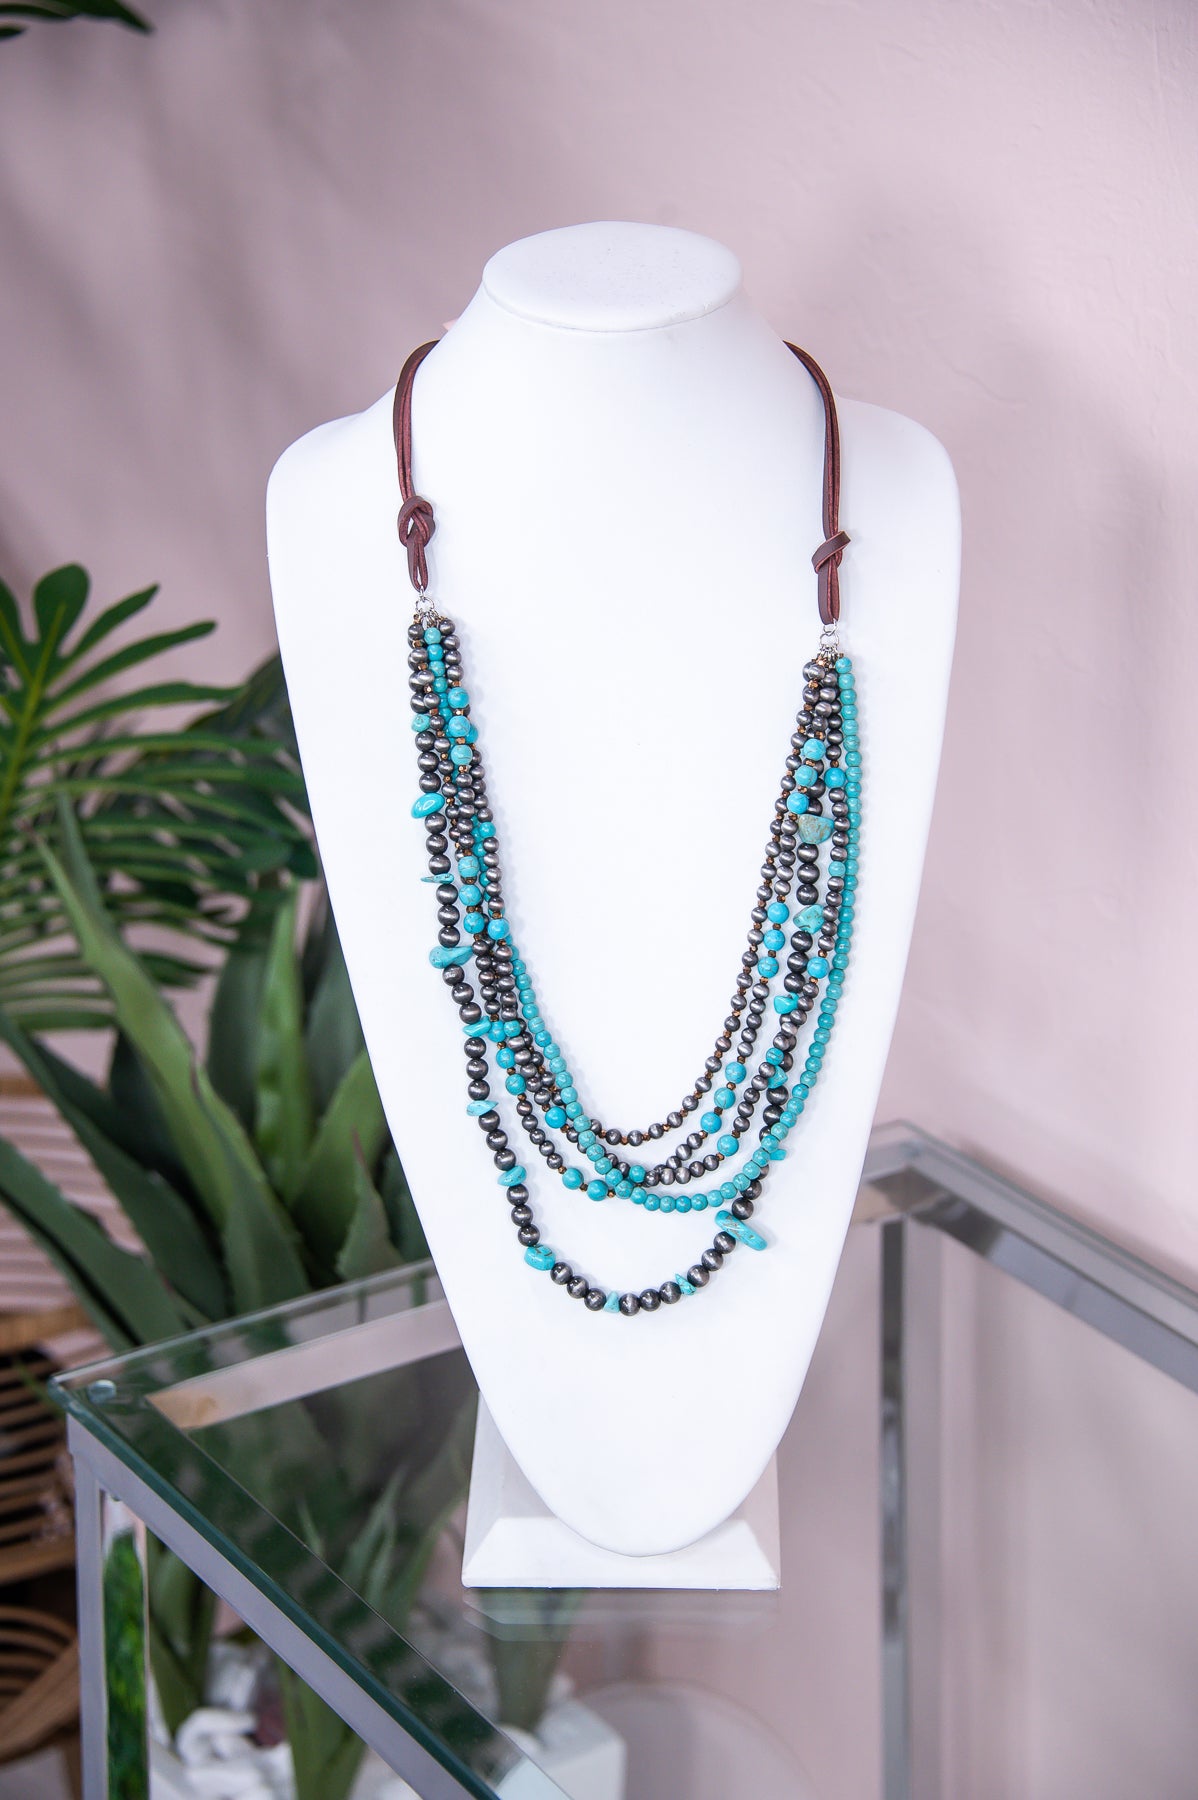 Turquoise/Silver Layered Beaded Cord Necklace - NEK4215TU